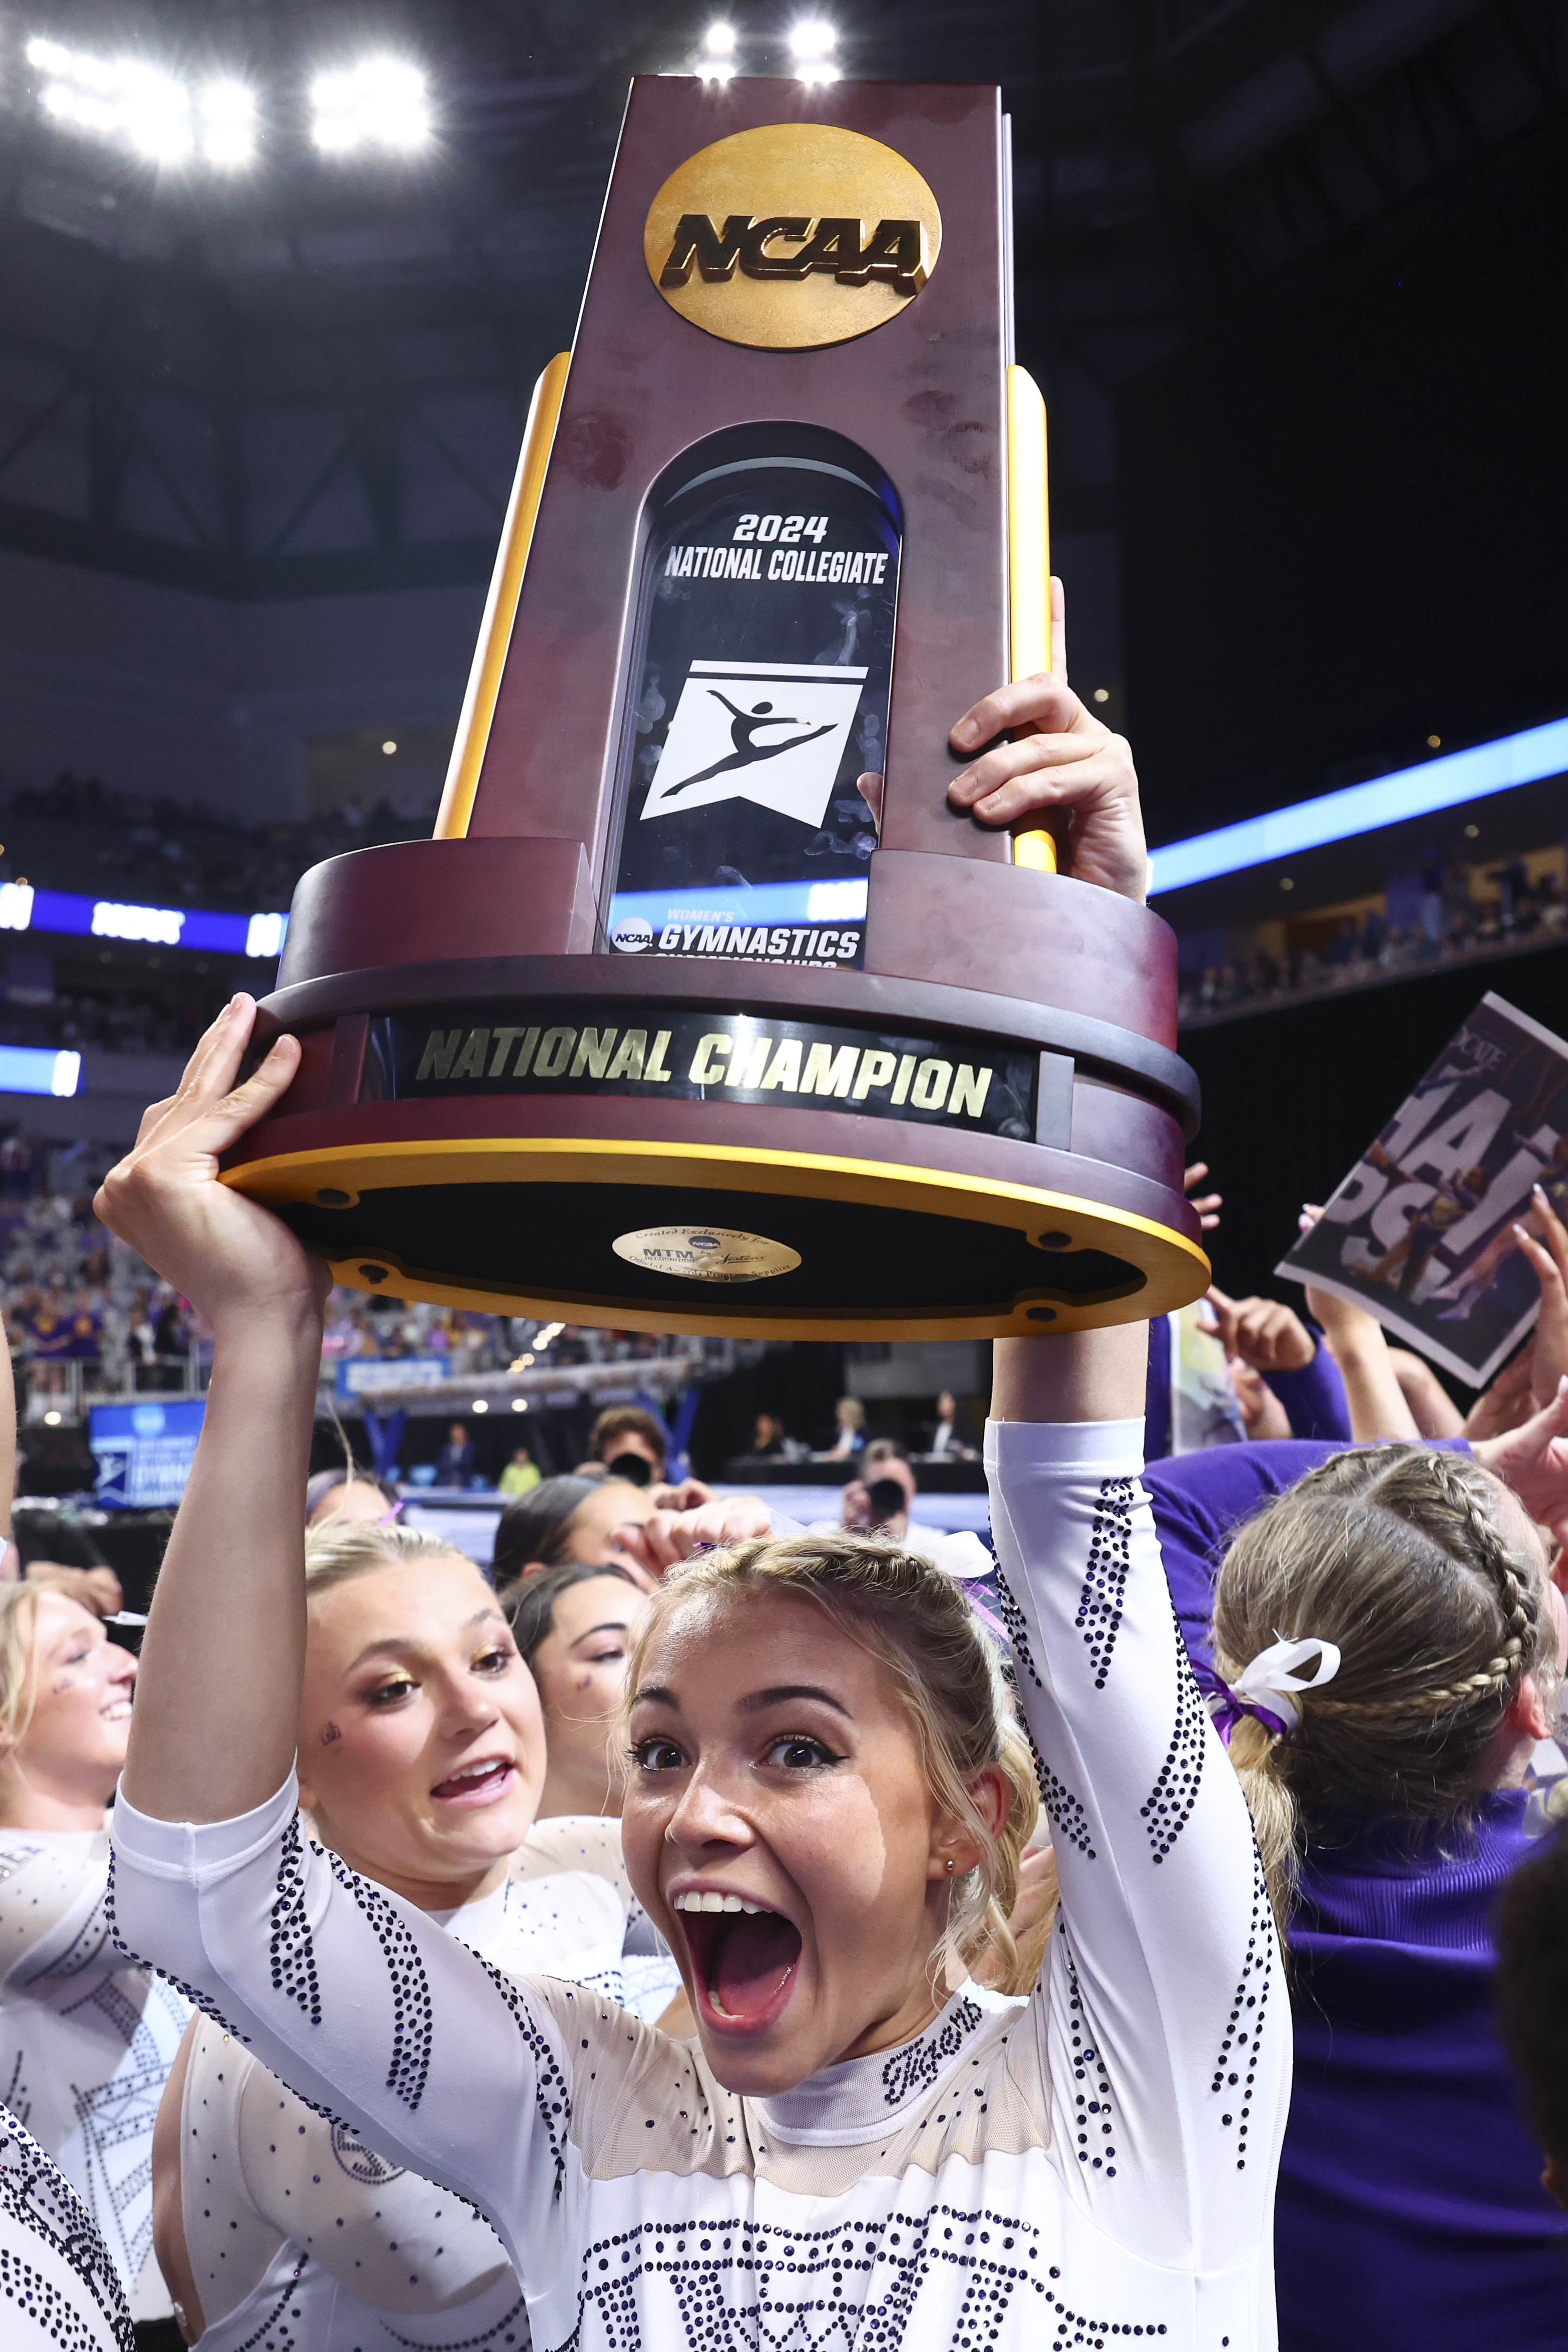 Dunne and the Tigers were recently named National Champions for the first time